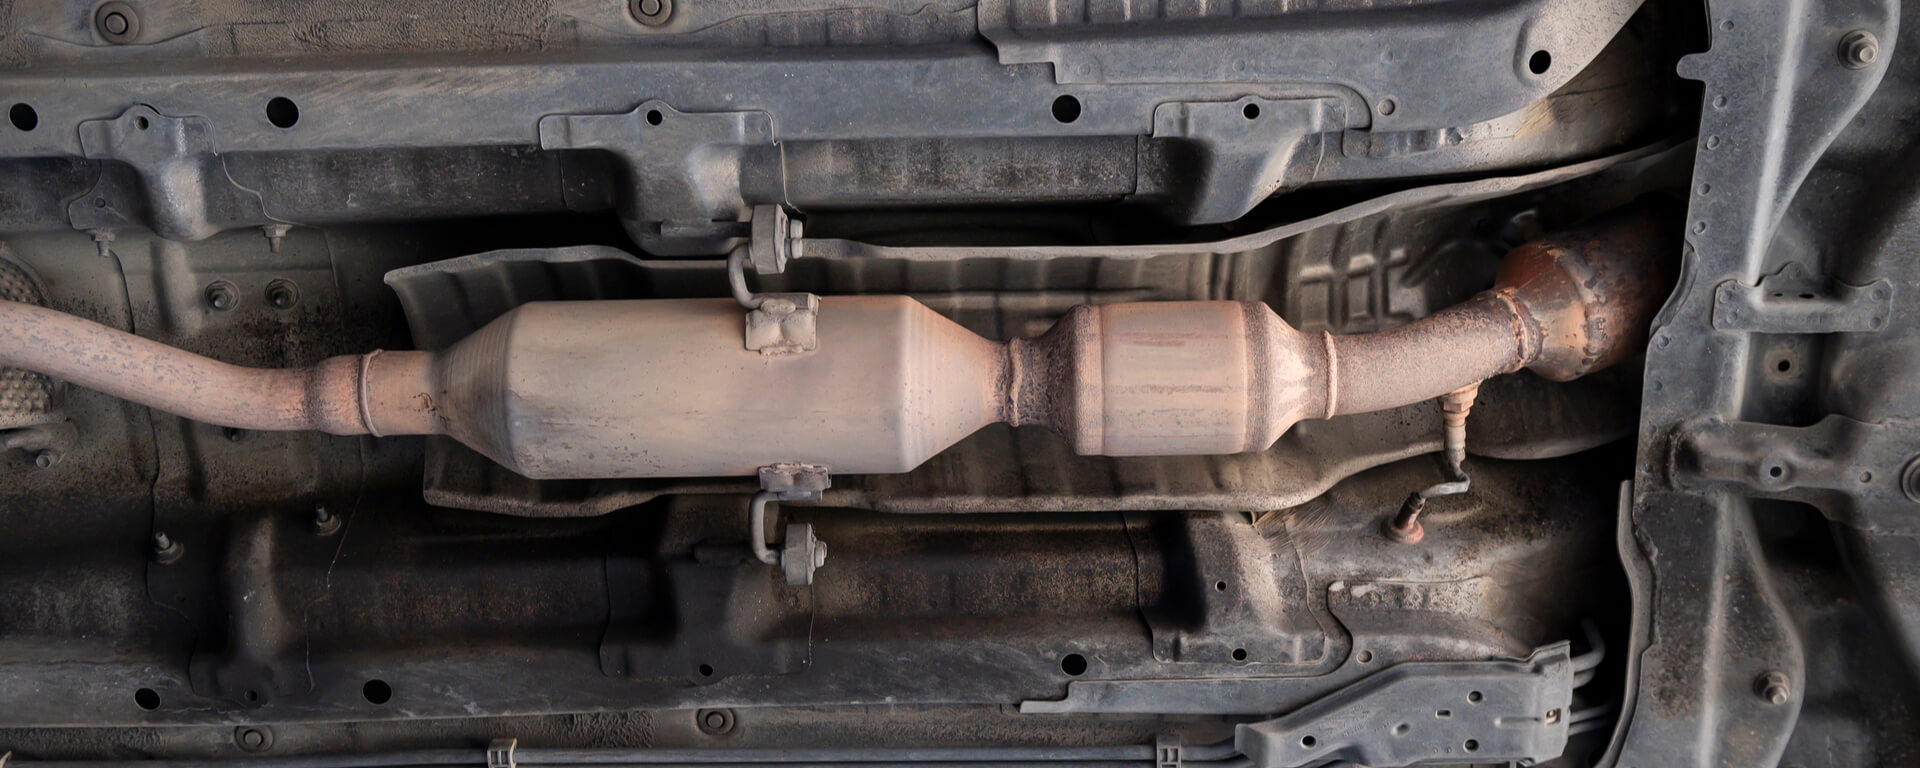 Catalytic Converter Thefts are on the Rise, But What Can You Do? Header Image